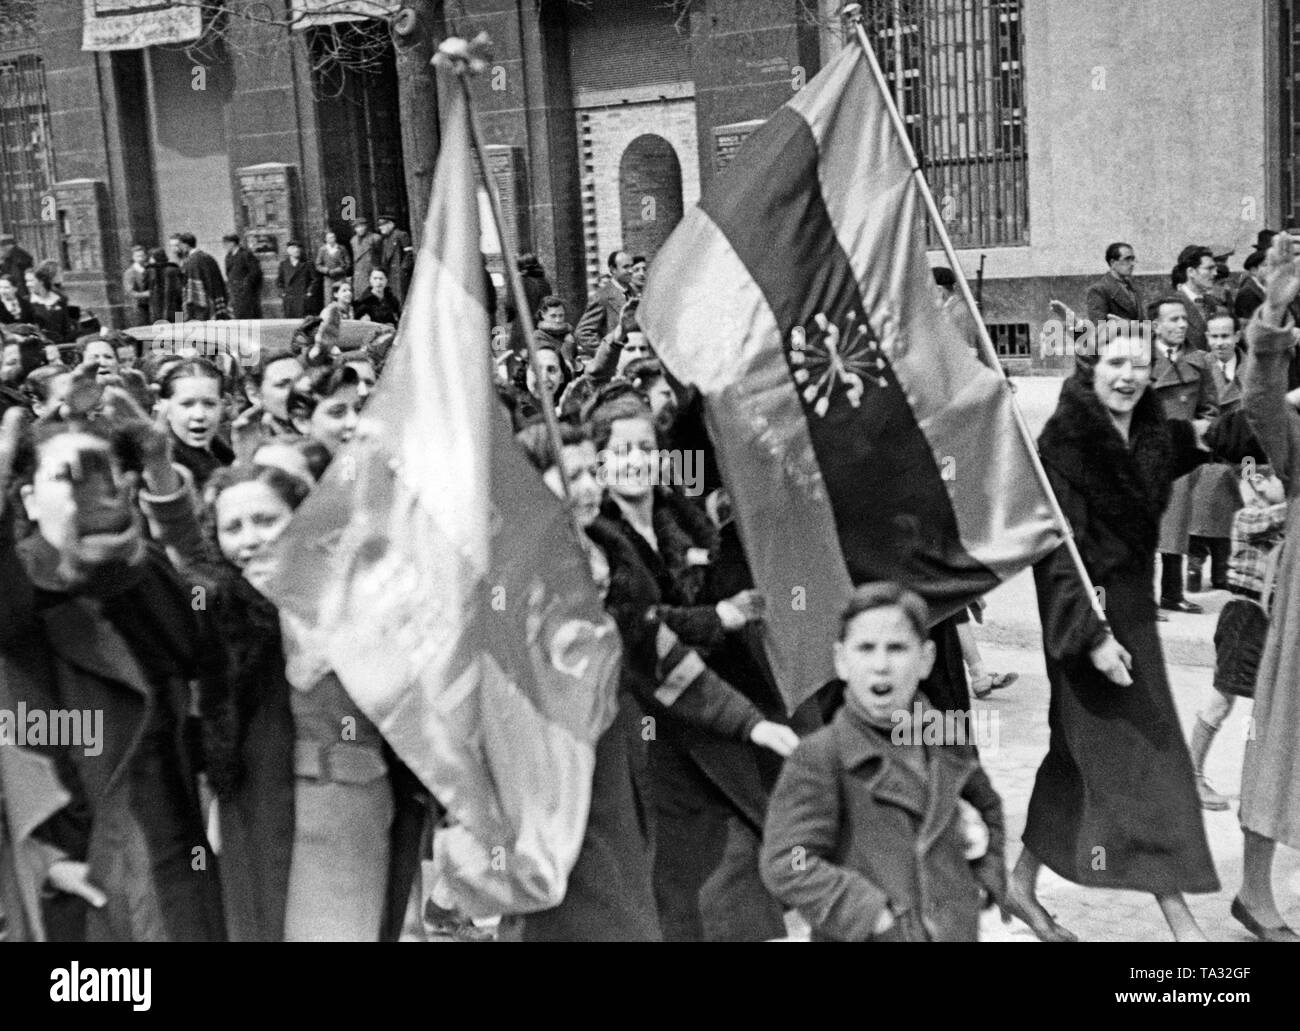 Supporters of General Franco walk through the streets of Madrid at the end of March after the entry of Franco's troops on March 28, 1939. The women raise the right arm in Fascist salute, on the red-blue flag at the front are the Yoke and Arrows as the symbol of the Fascist Party (Falange Espanola Tradicionalista de las JONS). Stock Photo